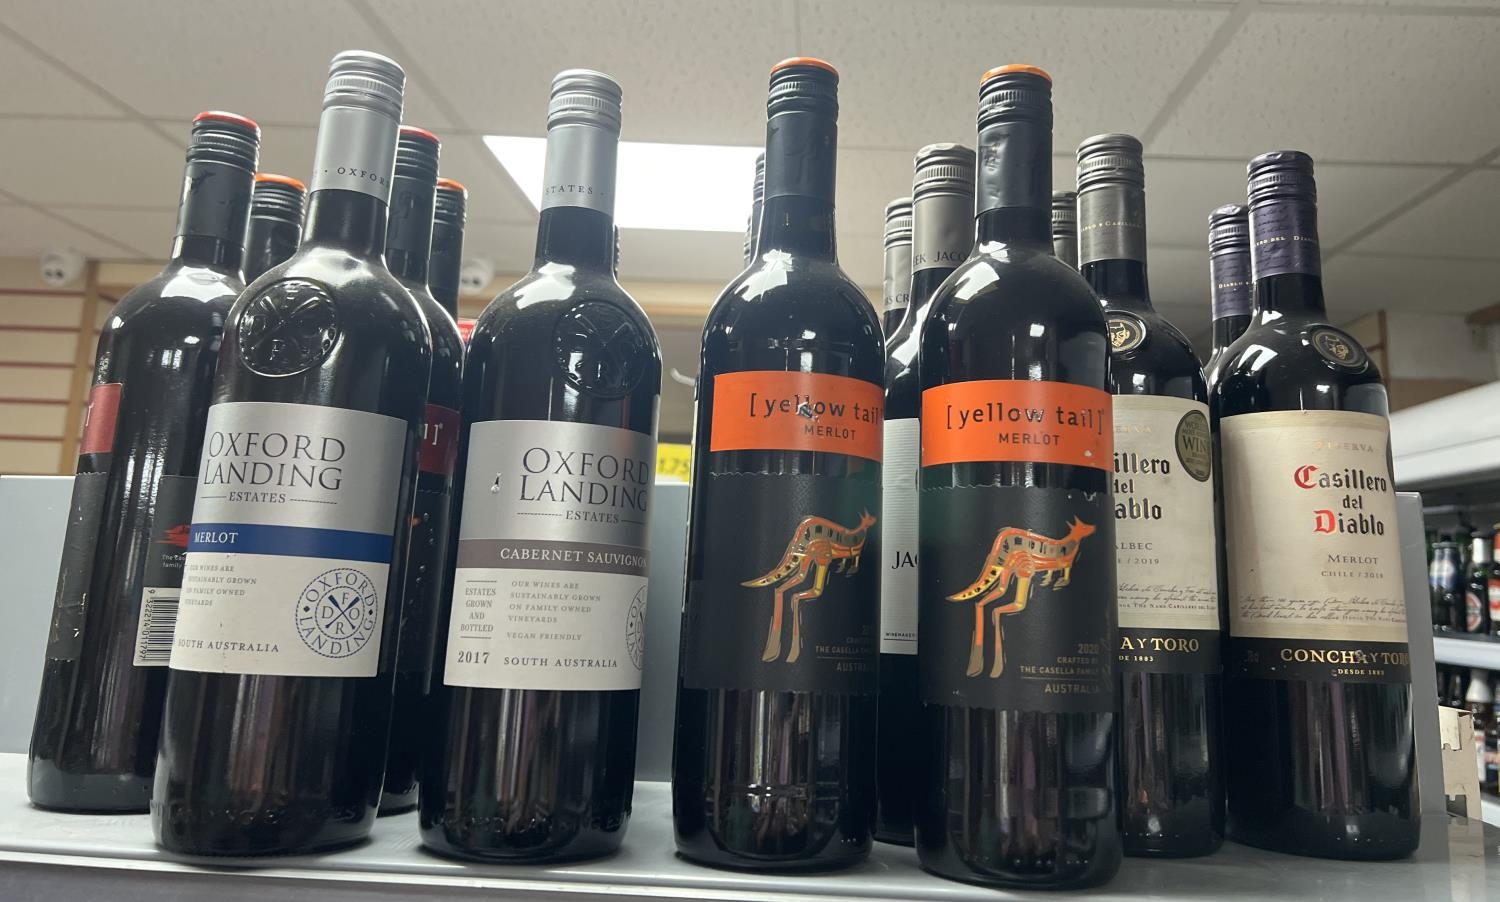 18 bottles of red wine to include Yellow tail, Oxford landing, CAsillero